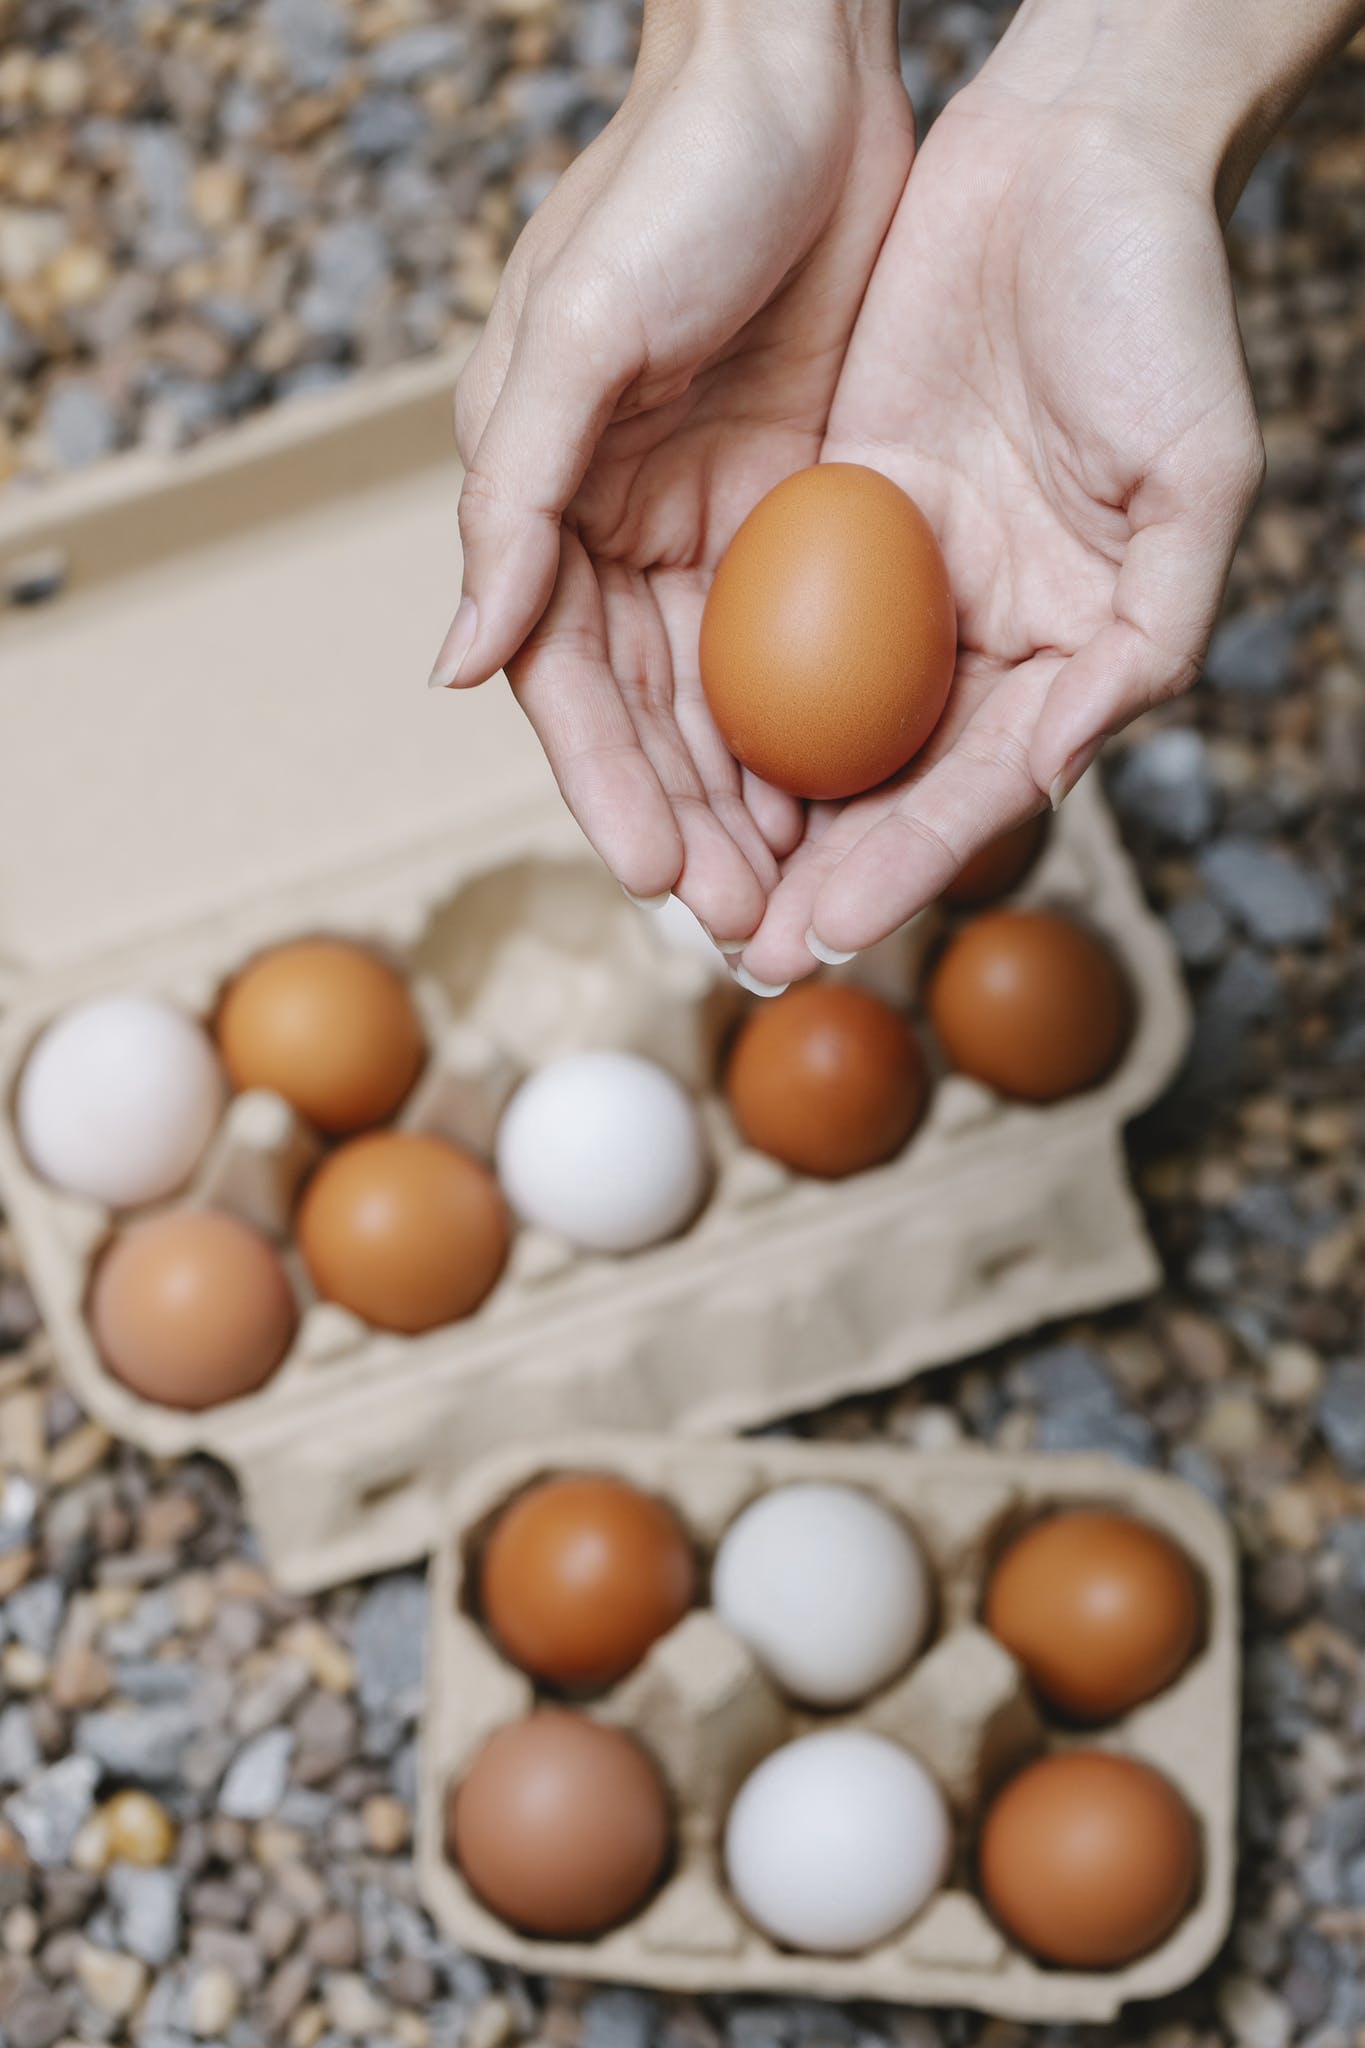 Crop anonymous female demonstrating clean fresh chicken eggs in carton box and in hands on blurred background of stones